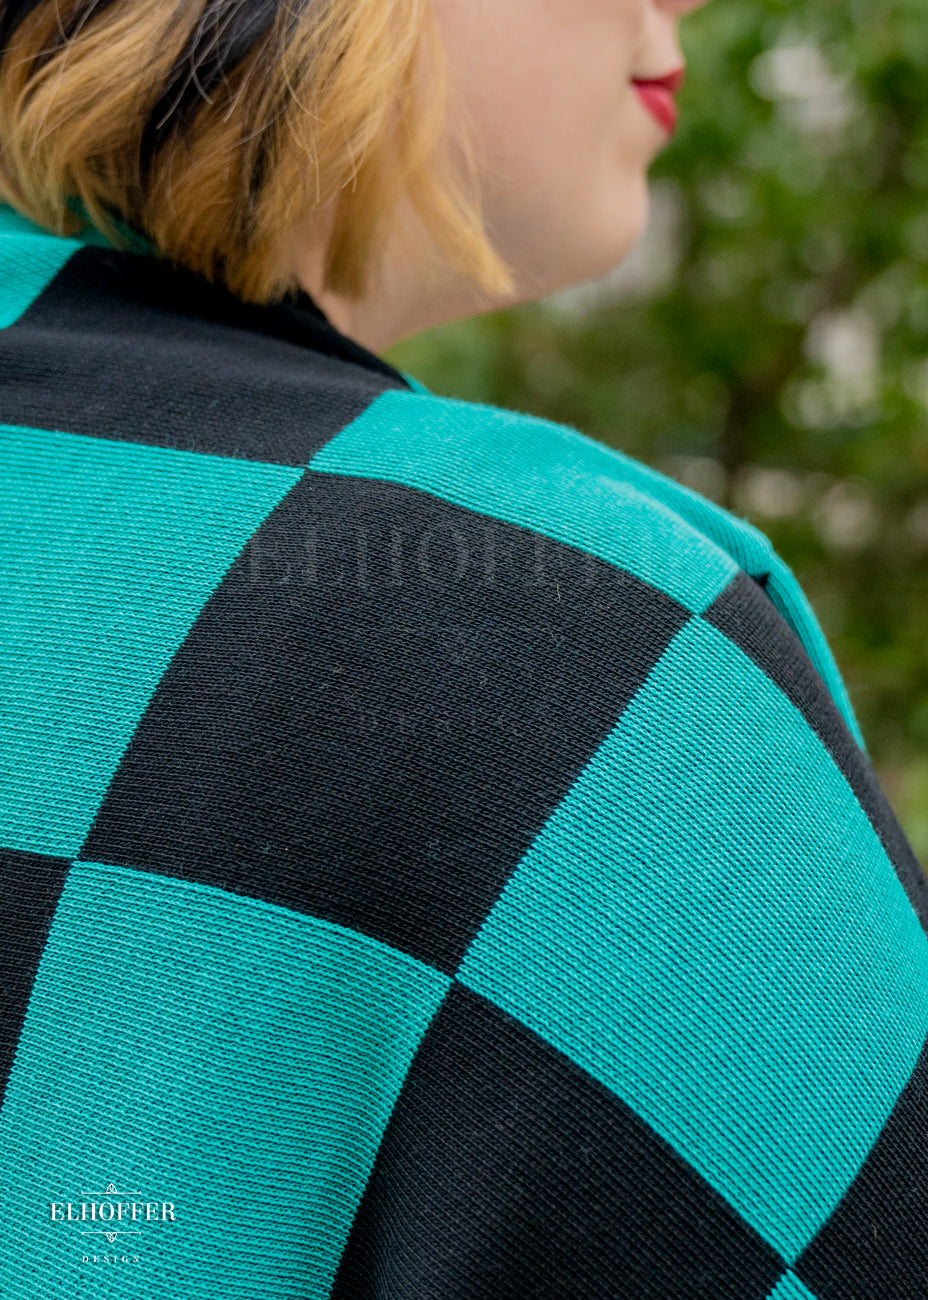 Close up of the black and green chessboard knit pattern